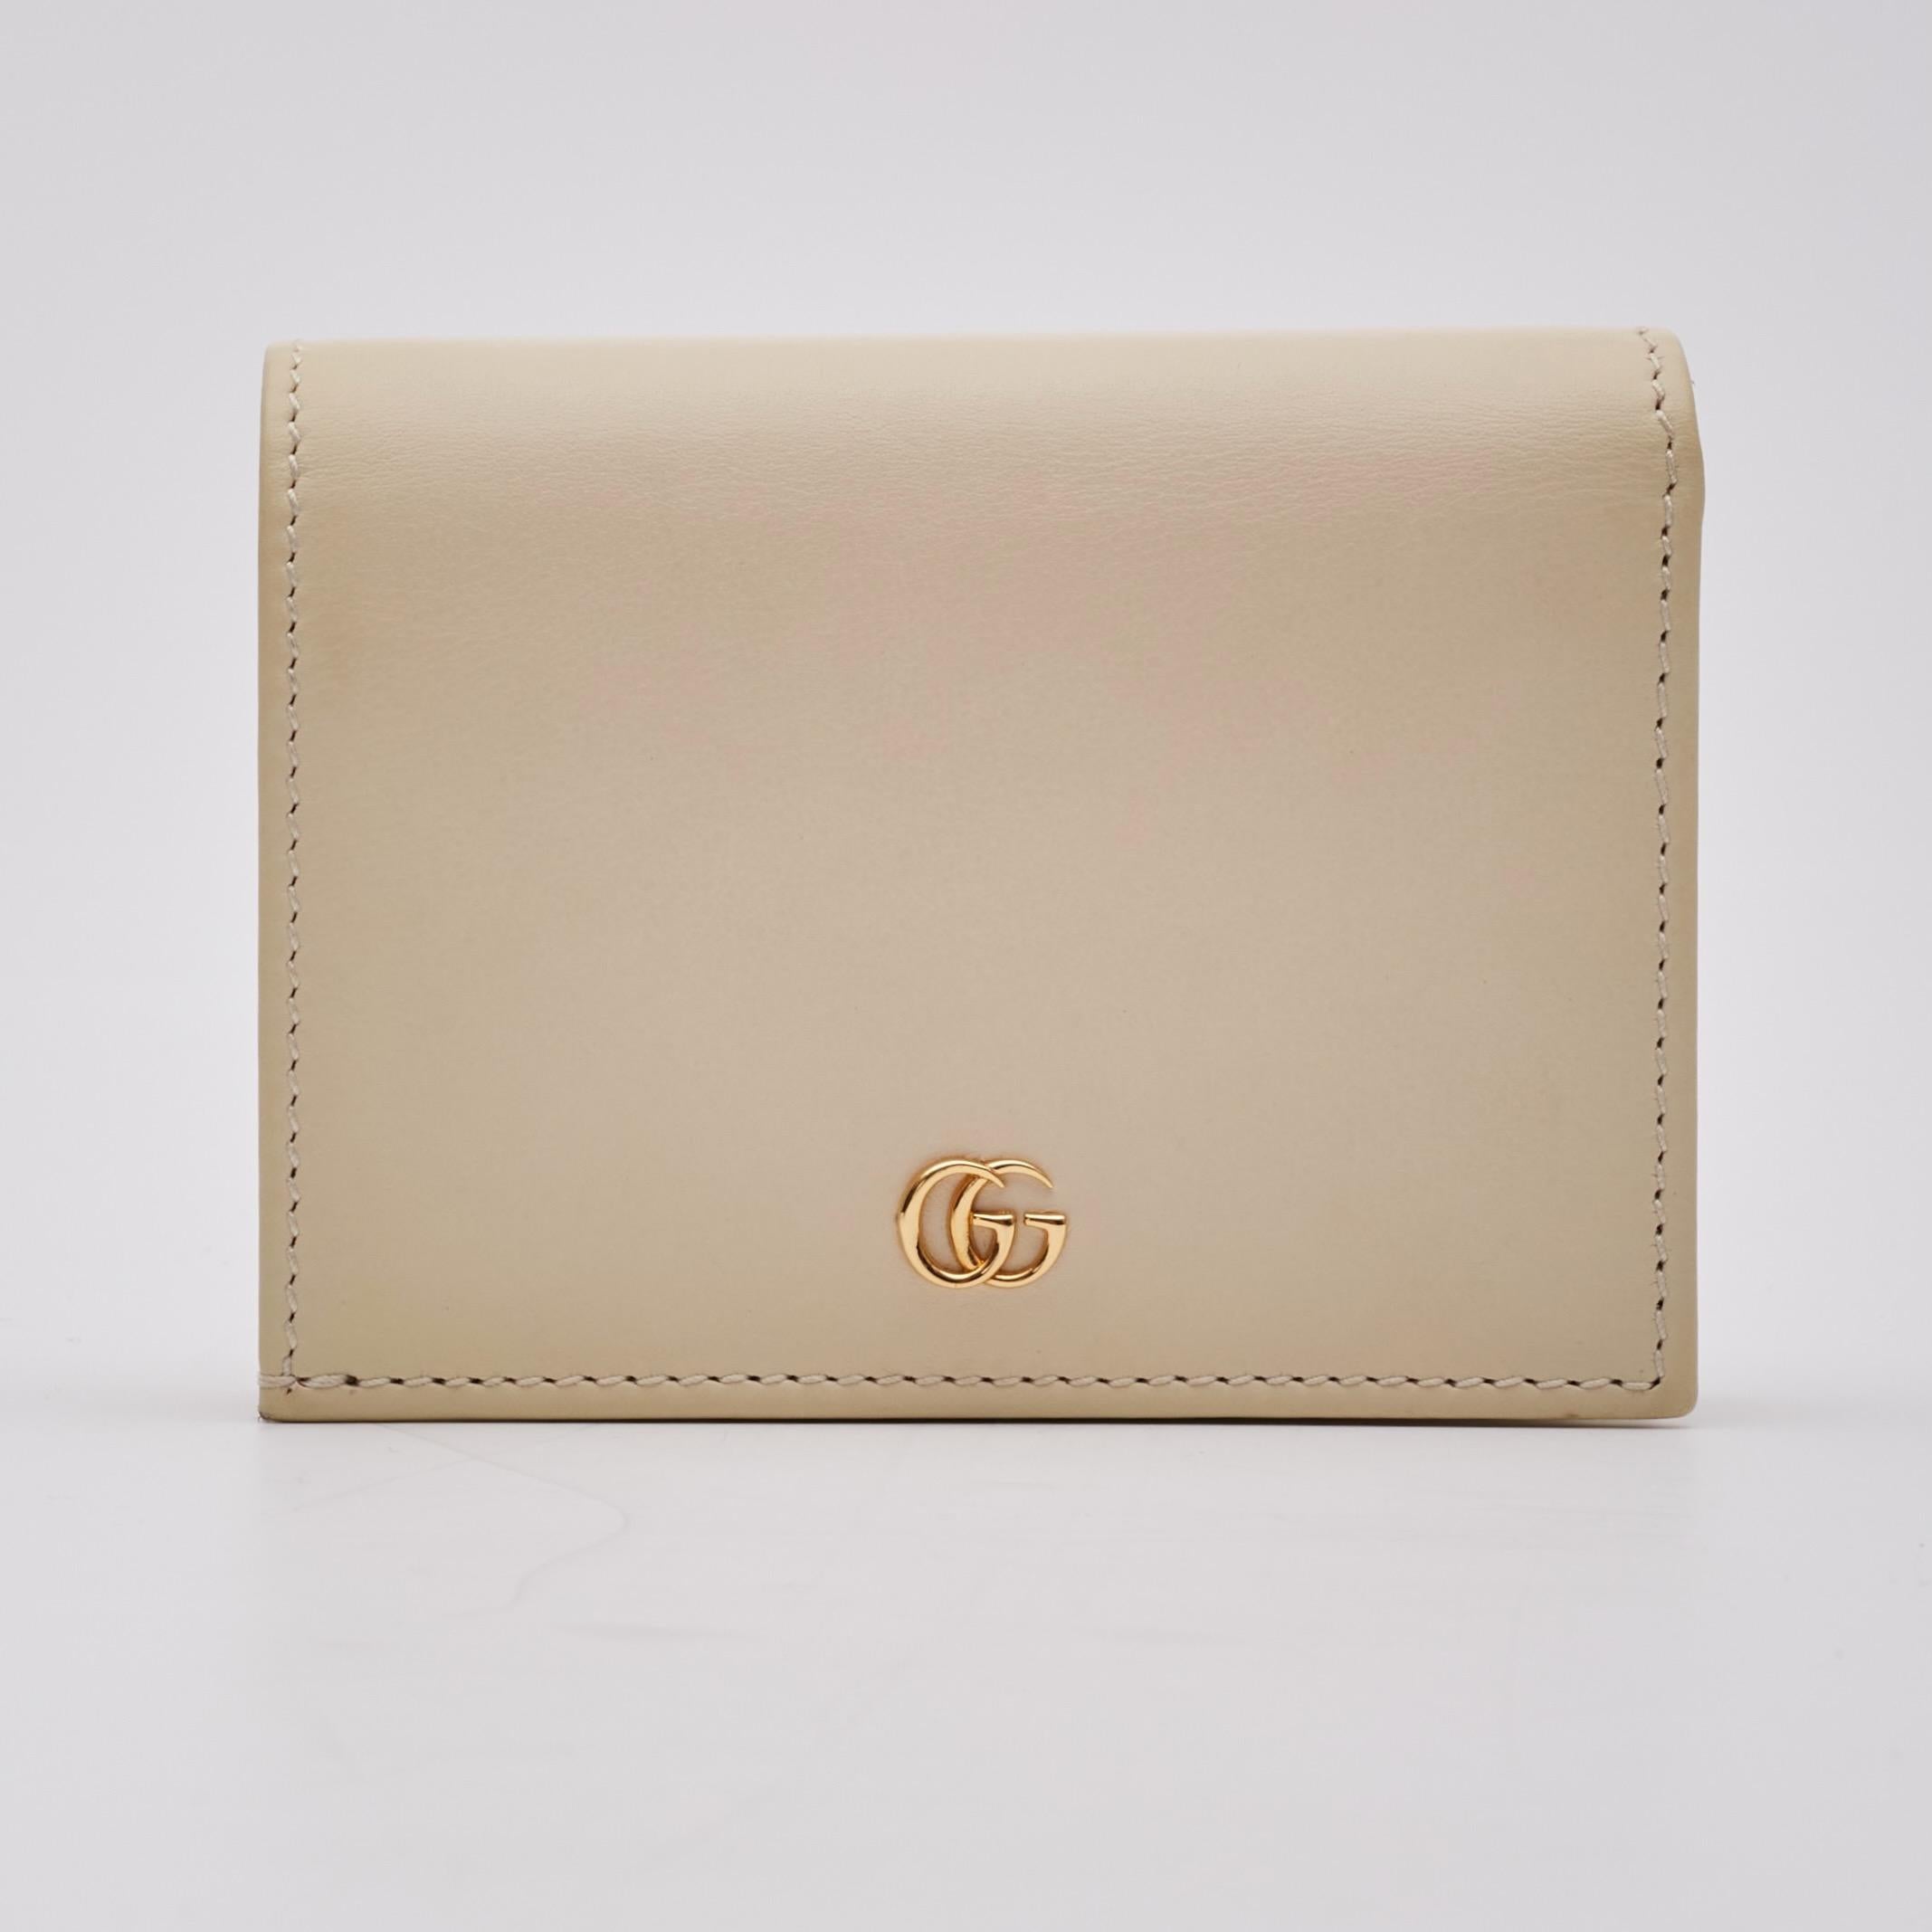 Gucci Calfskin Interlocking G Card Holder Case Mystic White In Excellent Condition For Sale In Montreal, Quebec